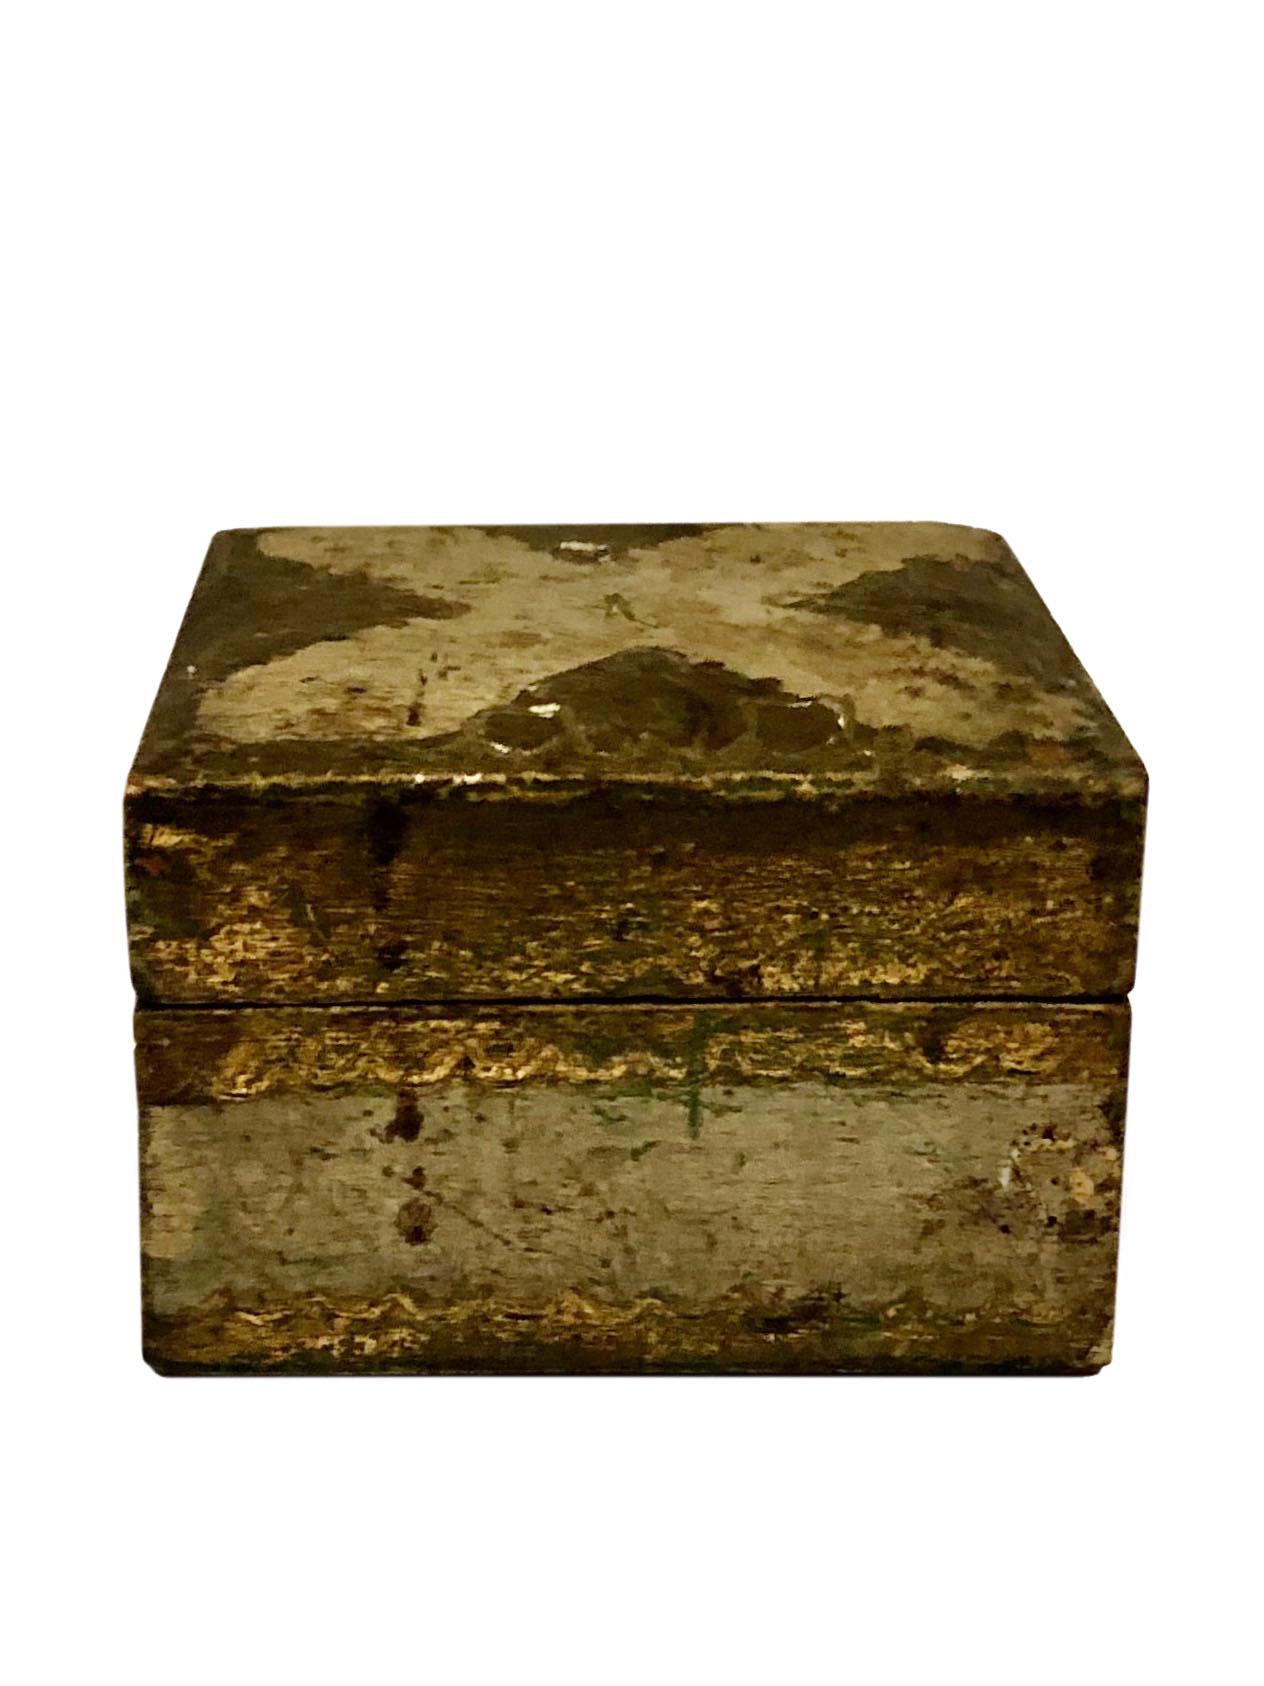 Antique Small Turn of the Century Florentine Box In Good Condition For Sale In Tampa, FL